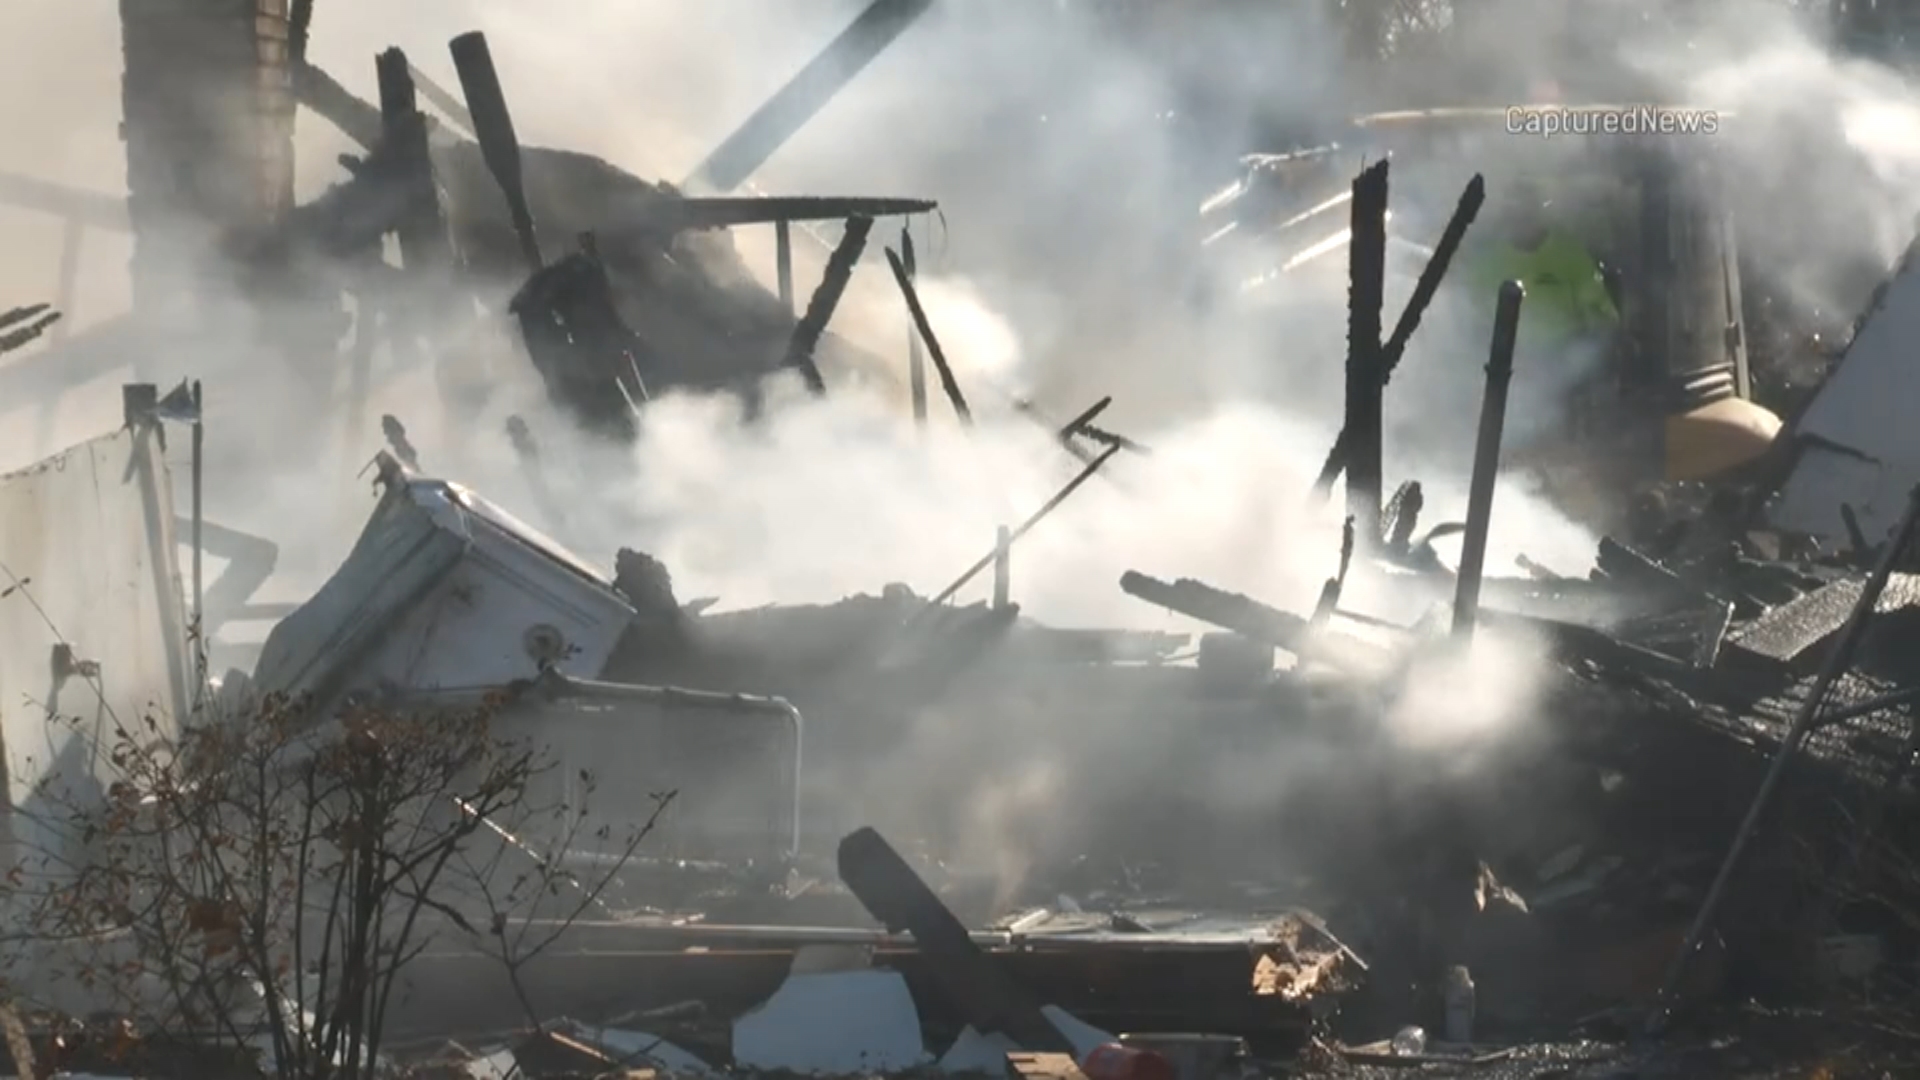 Woman Dies in Indiana House Explosion, Authorities Say – NBC Chicago